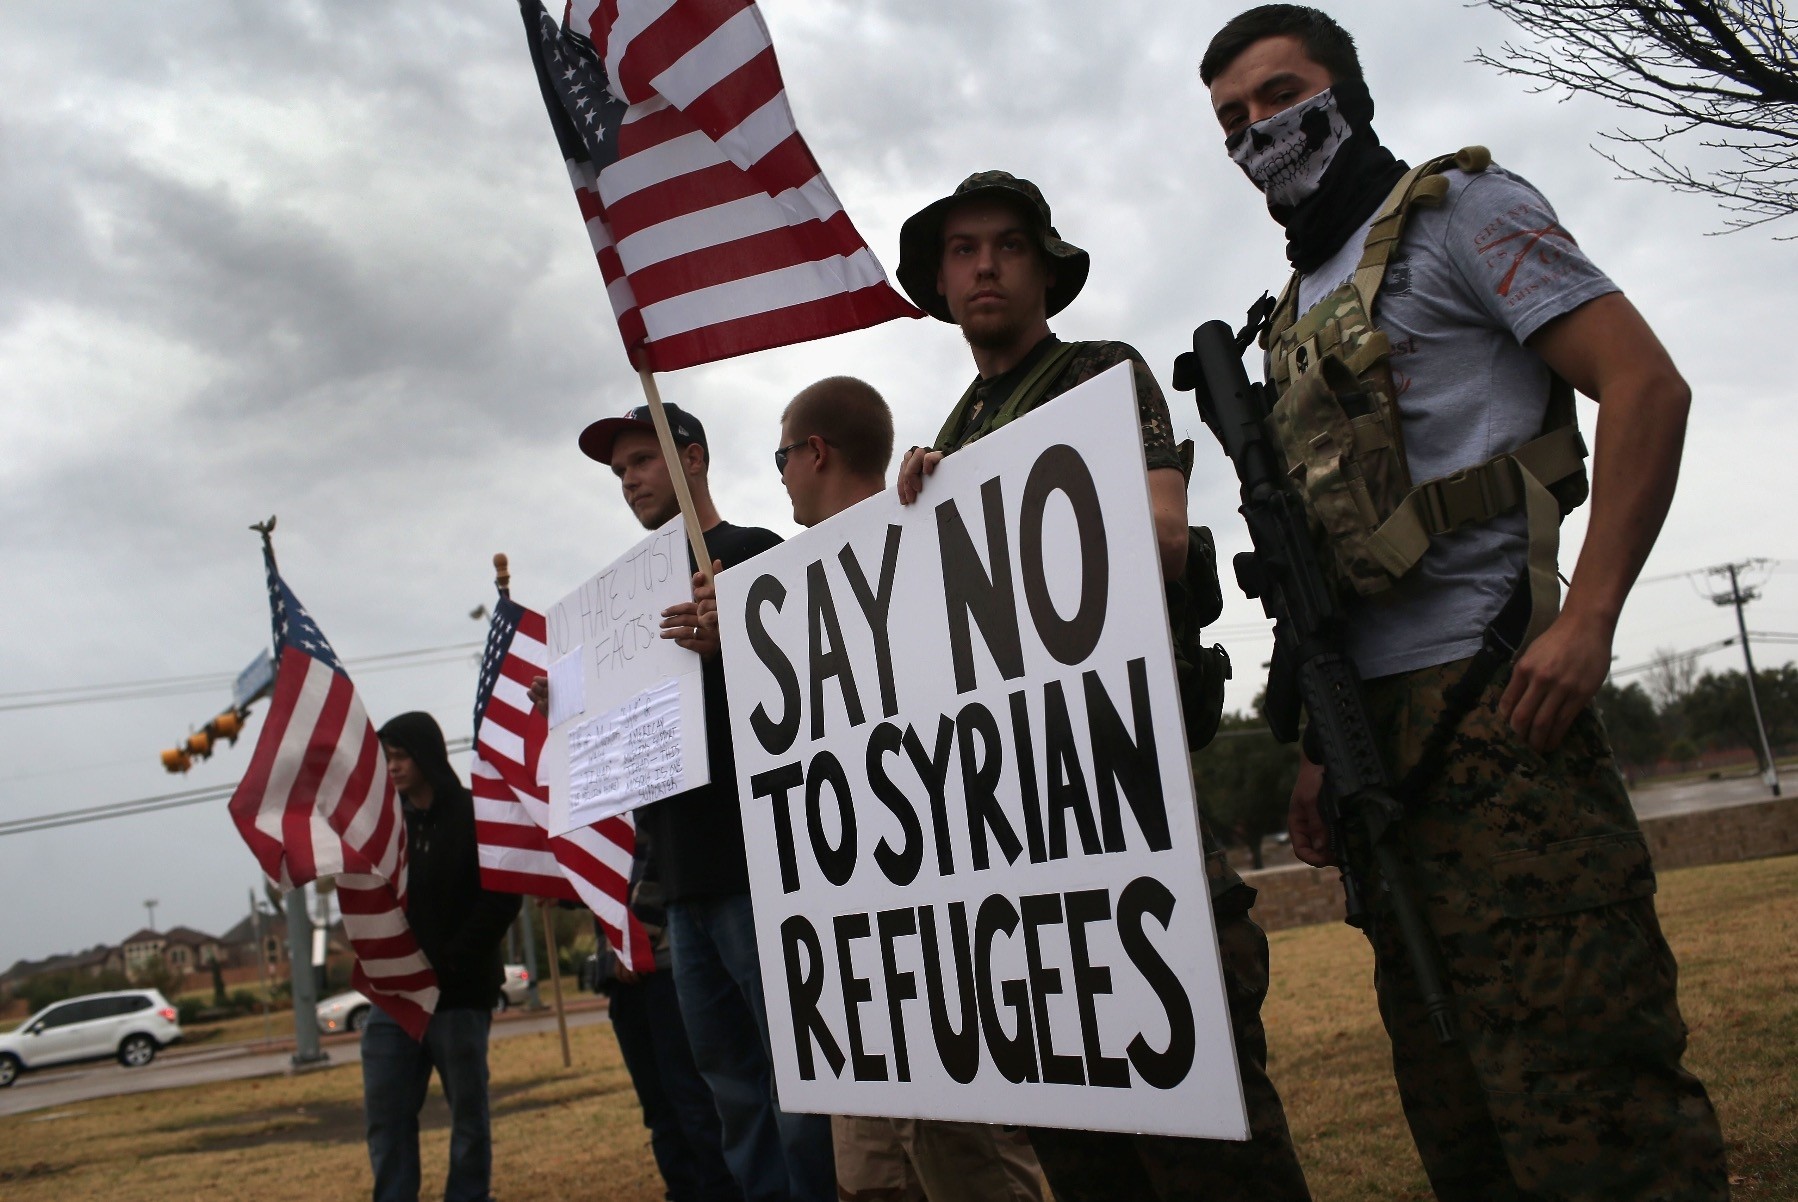 Armed protesters of a far-right U.S. group during a demonstration against Muslim refugees in front of a mosque in Richardson, Texas, Dec. 12, 2015.